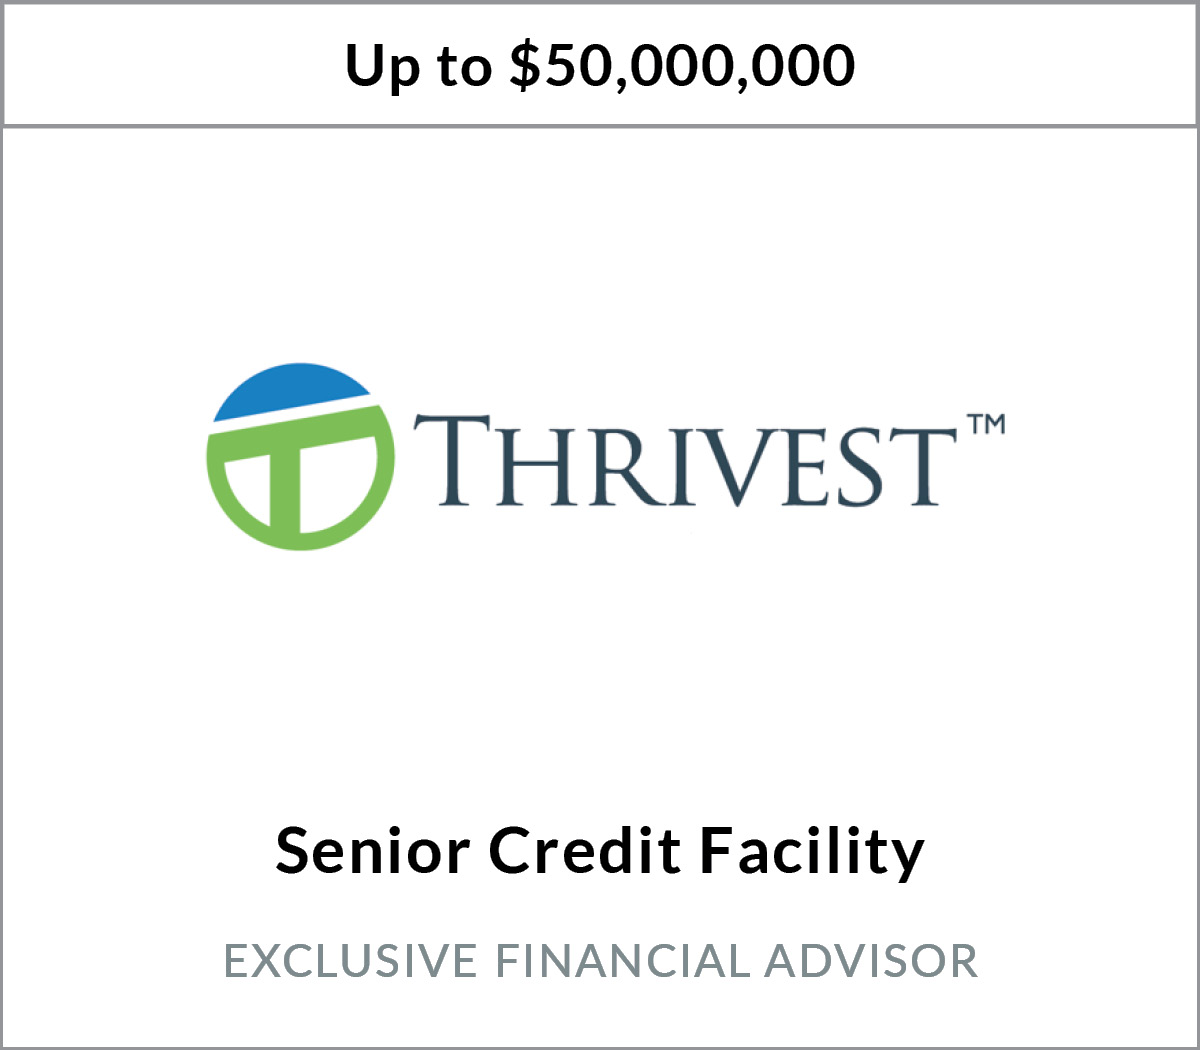 Bryant Park Capital Arranges $50 Million Structured Credit Facility for Thrivest Legal Funding, LLC